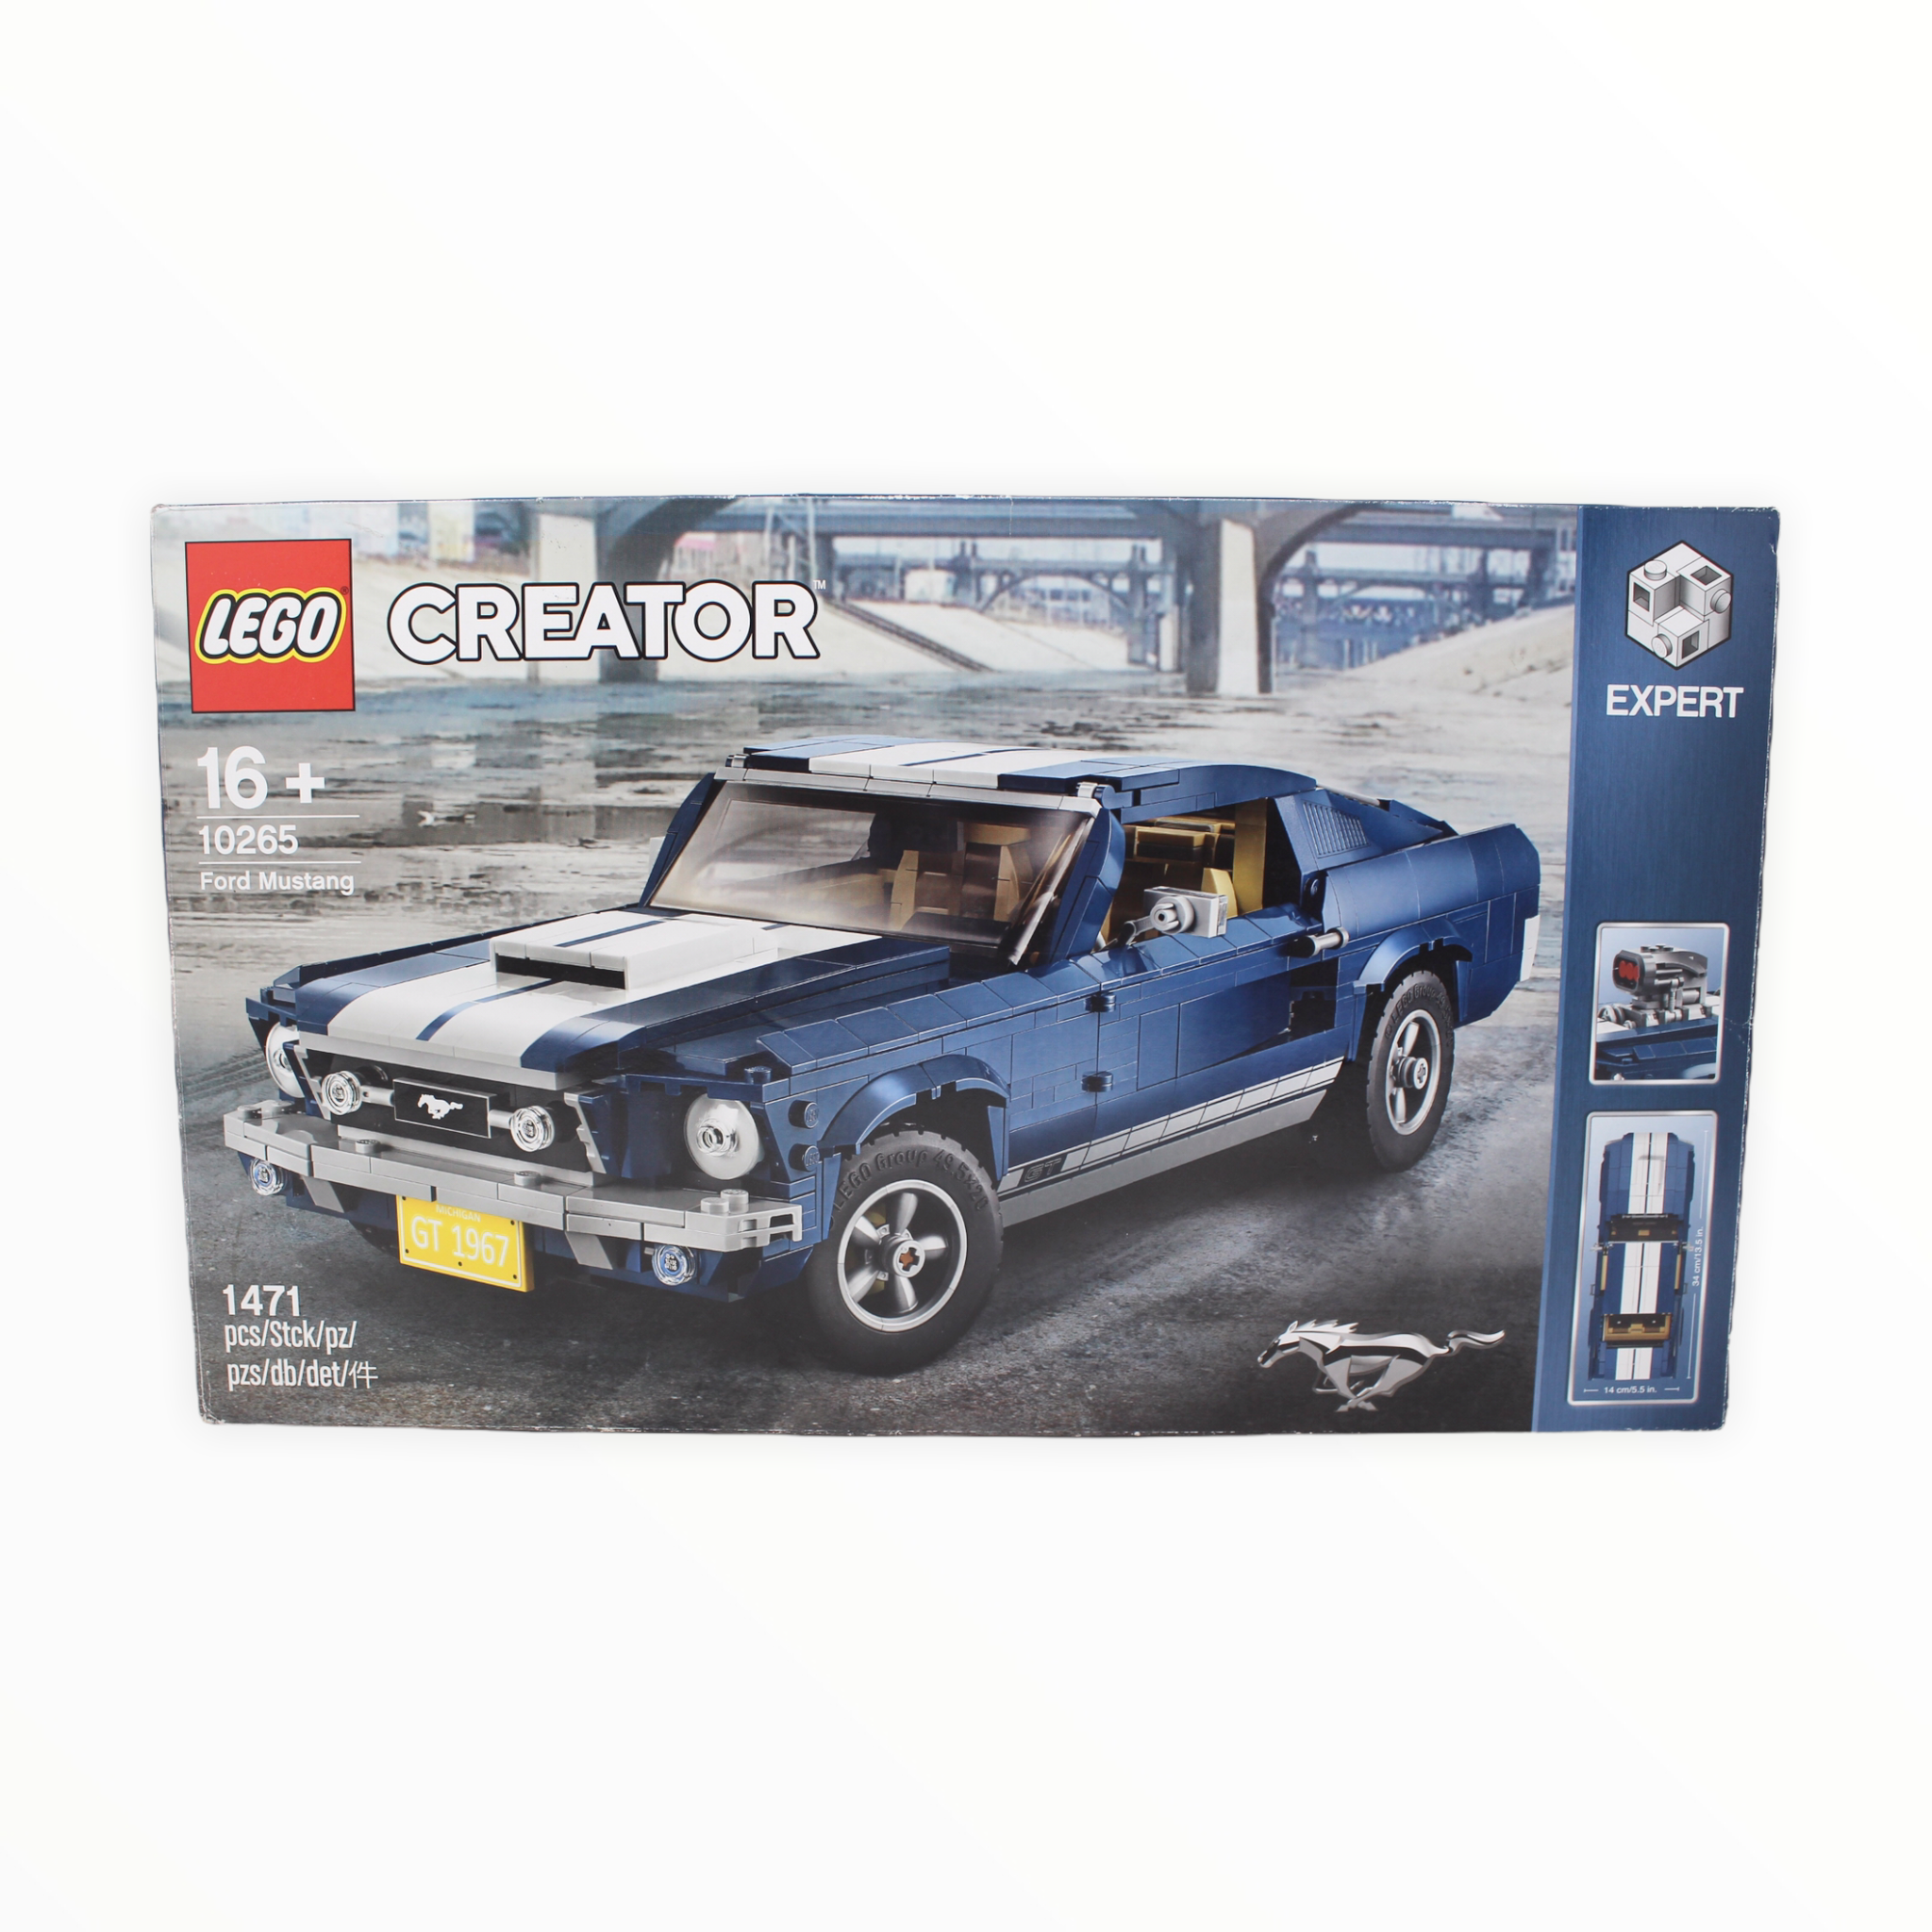 Certified Used Set 10265 Creator Ford Mustang